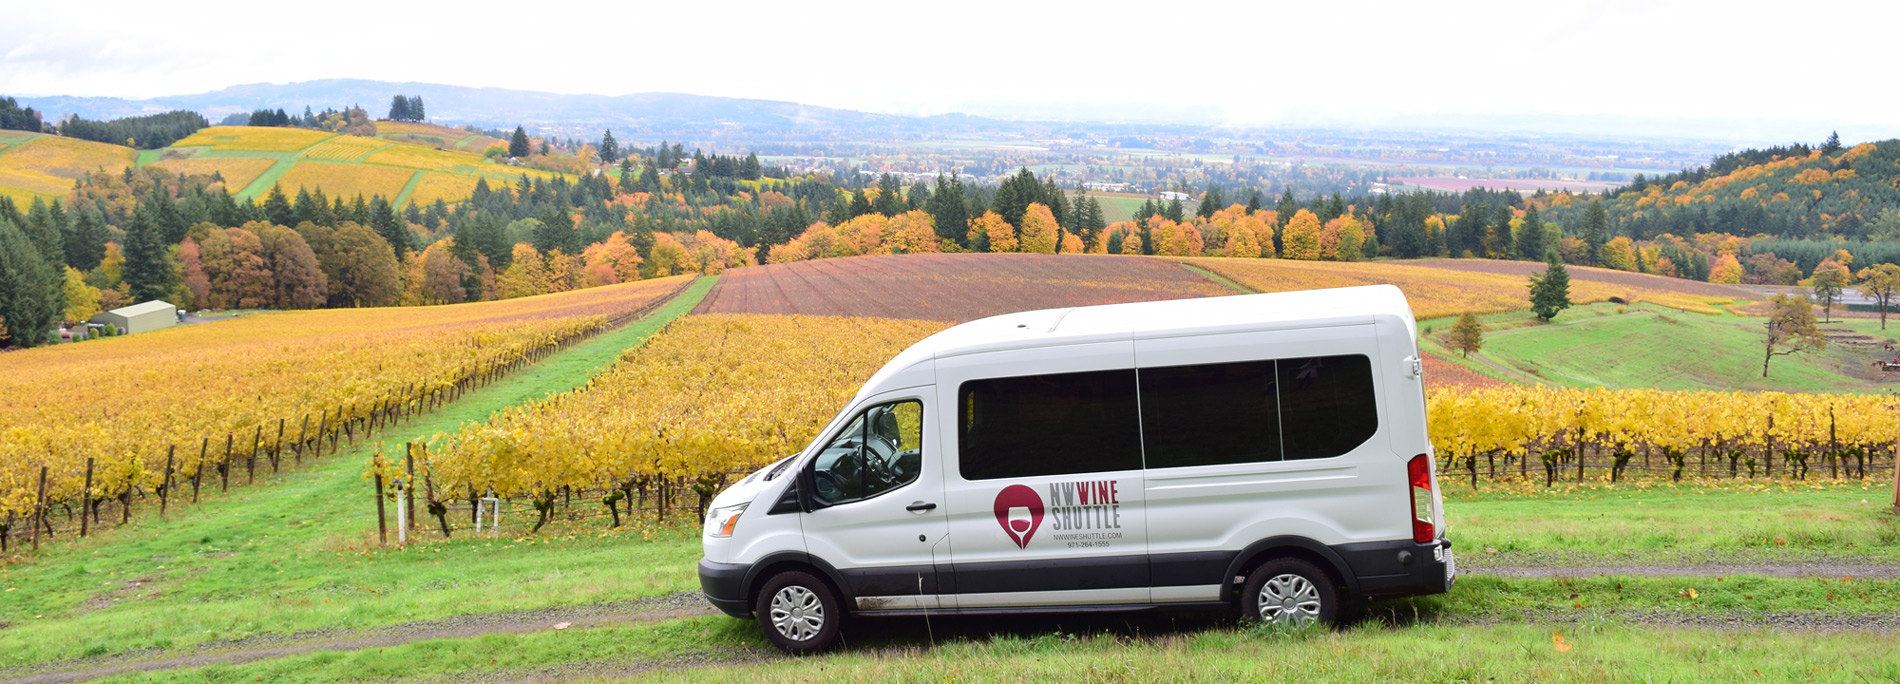 touring van with lettering for NW Wine Shuttle tour company with vineyards in background